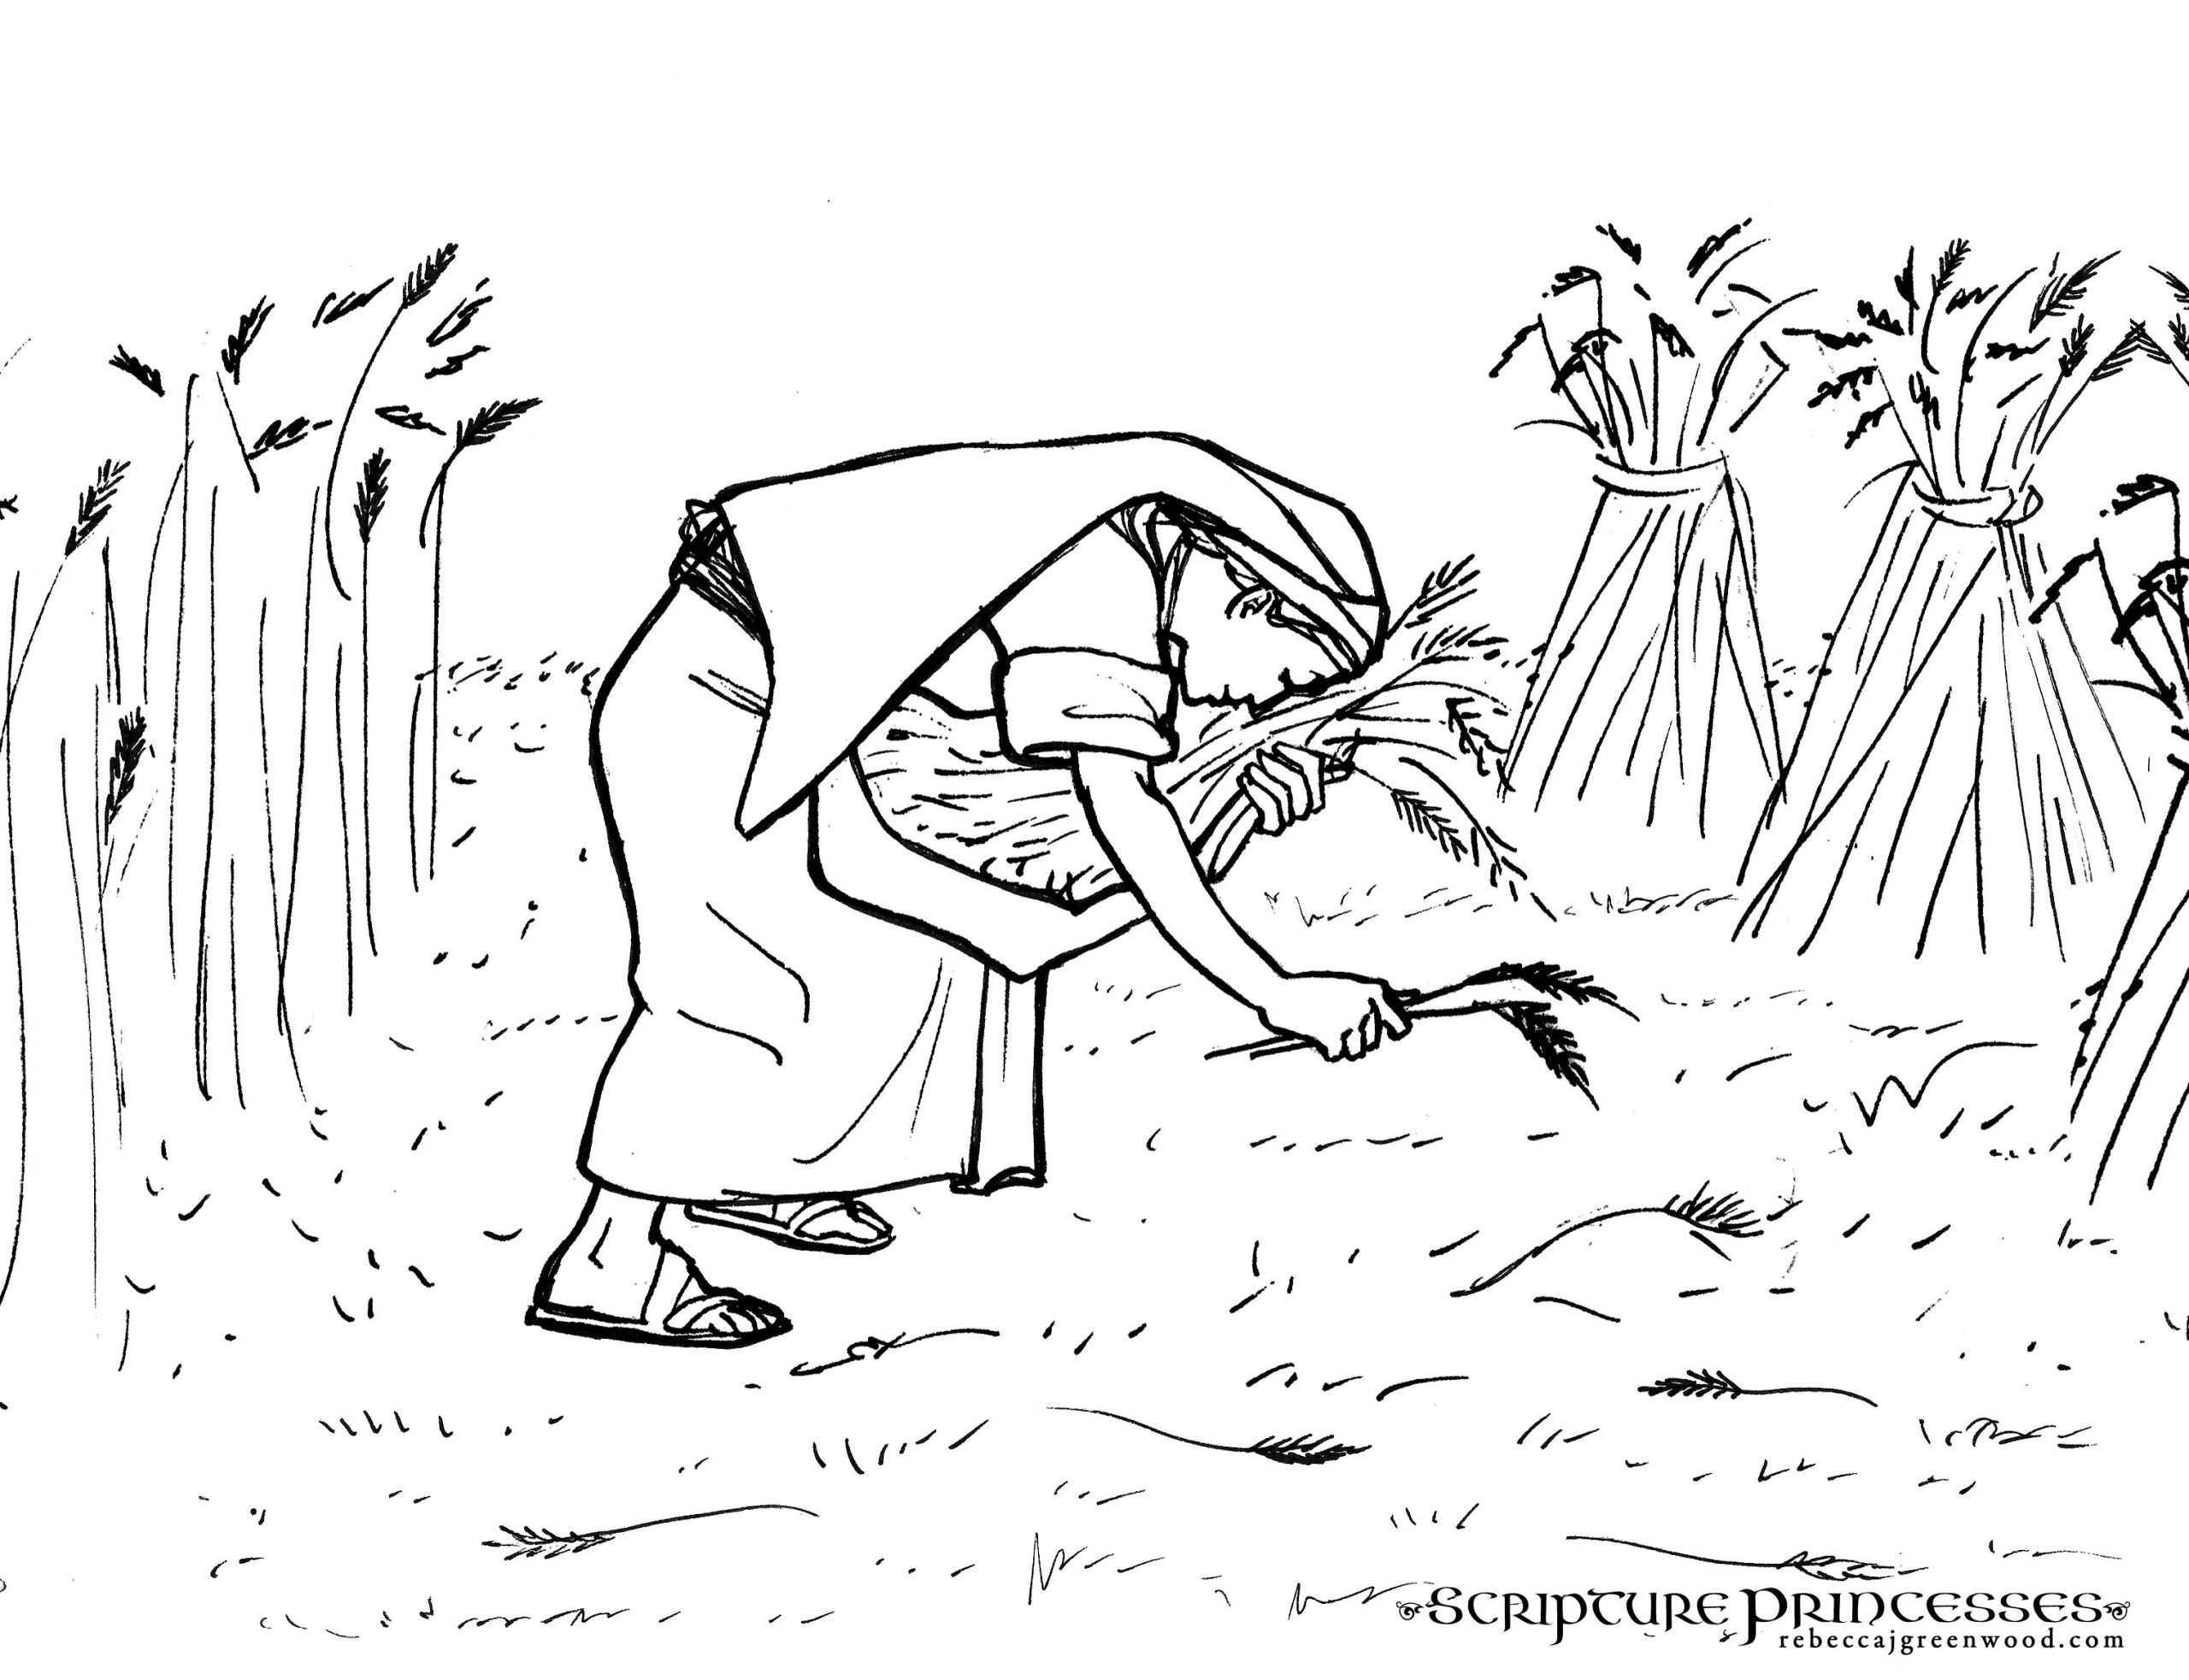 Coloring Pages For Children On The Story Of Ruth And Naomi
 Ruth and Naomi Coloring Pages to Print